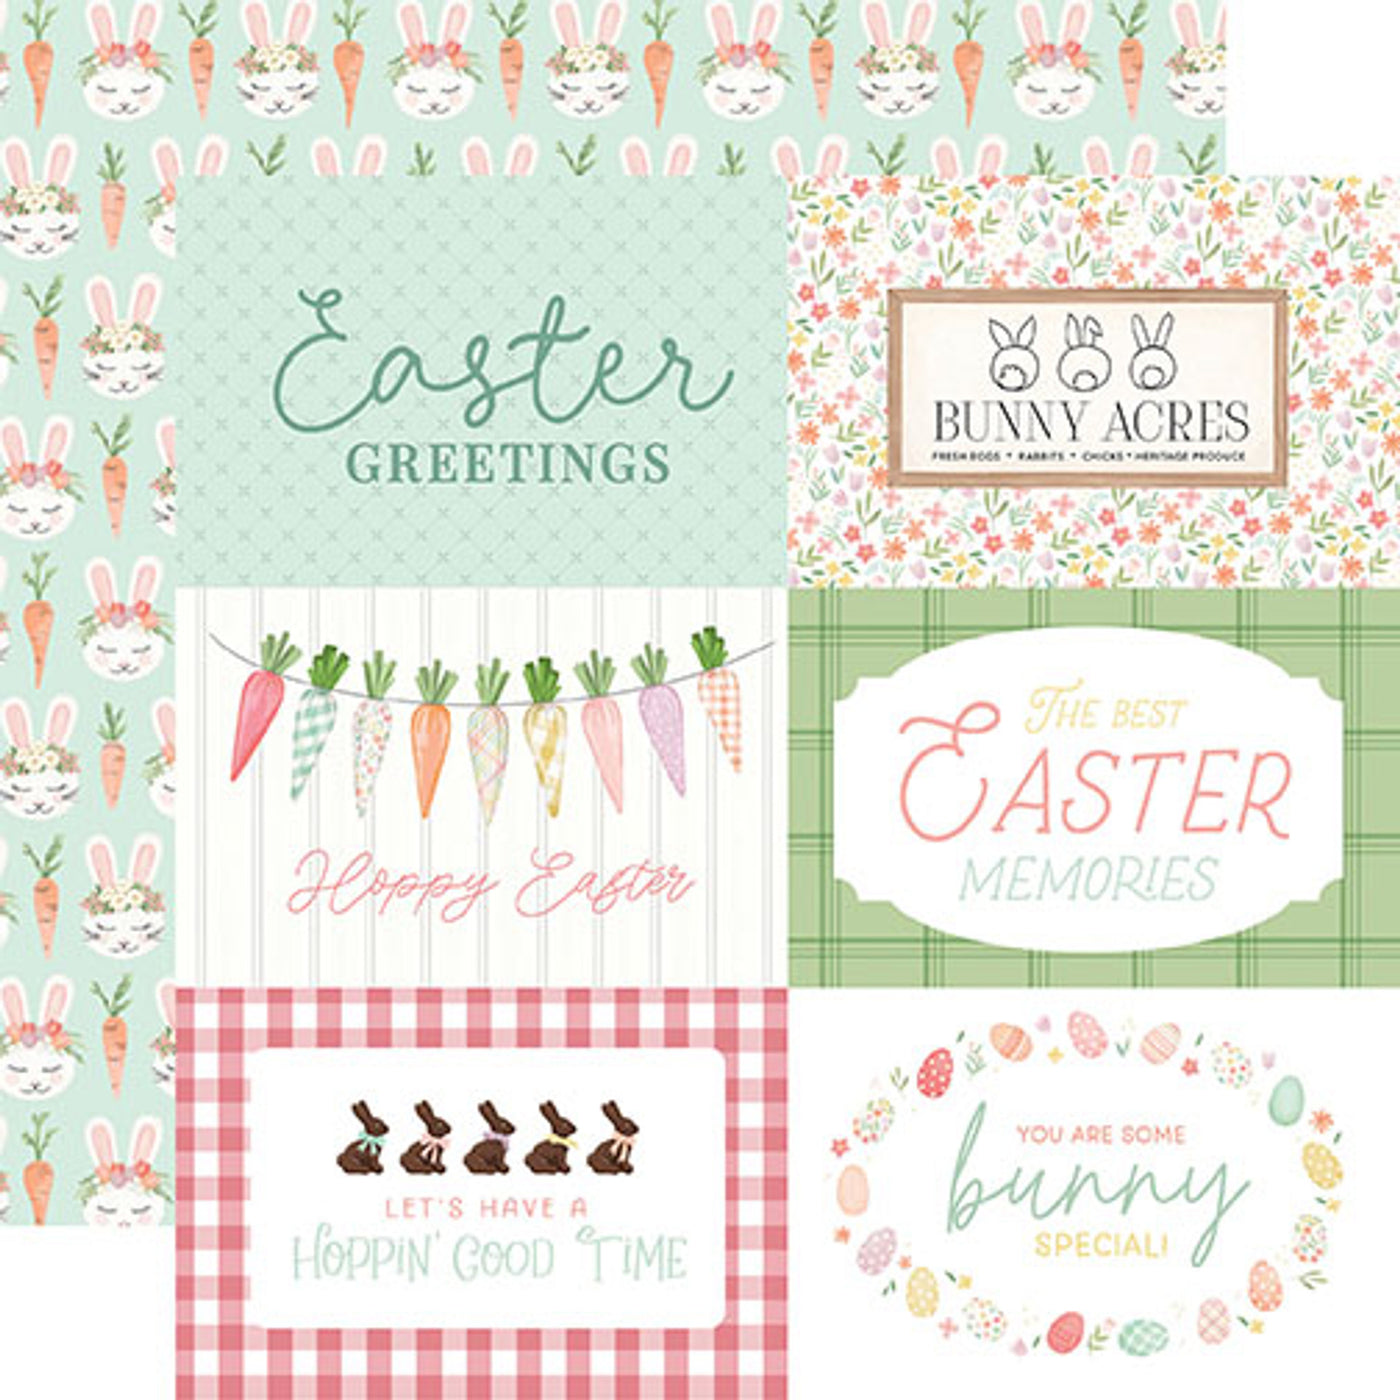 12x12 double-sided patterned paper - (Easter Journaling cards with rows of  bunny faces and carrots in between on a mint green background reverse) - from Carta Bella Paper